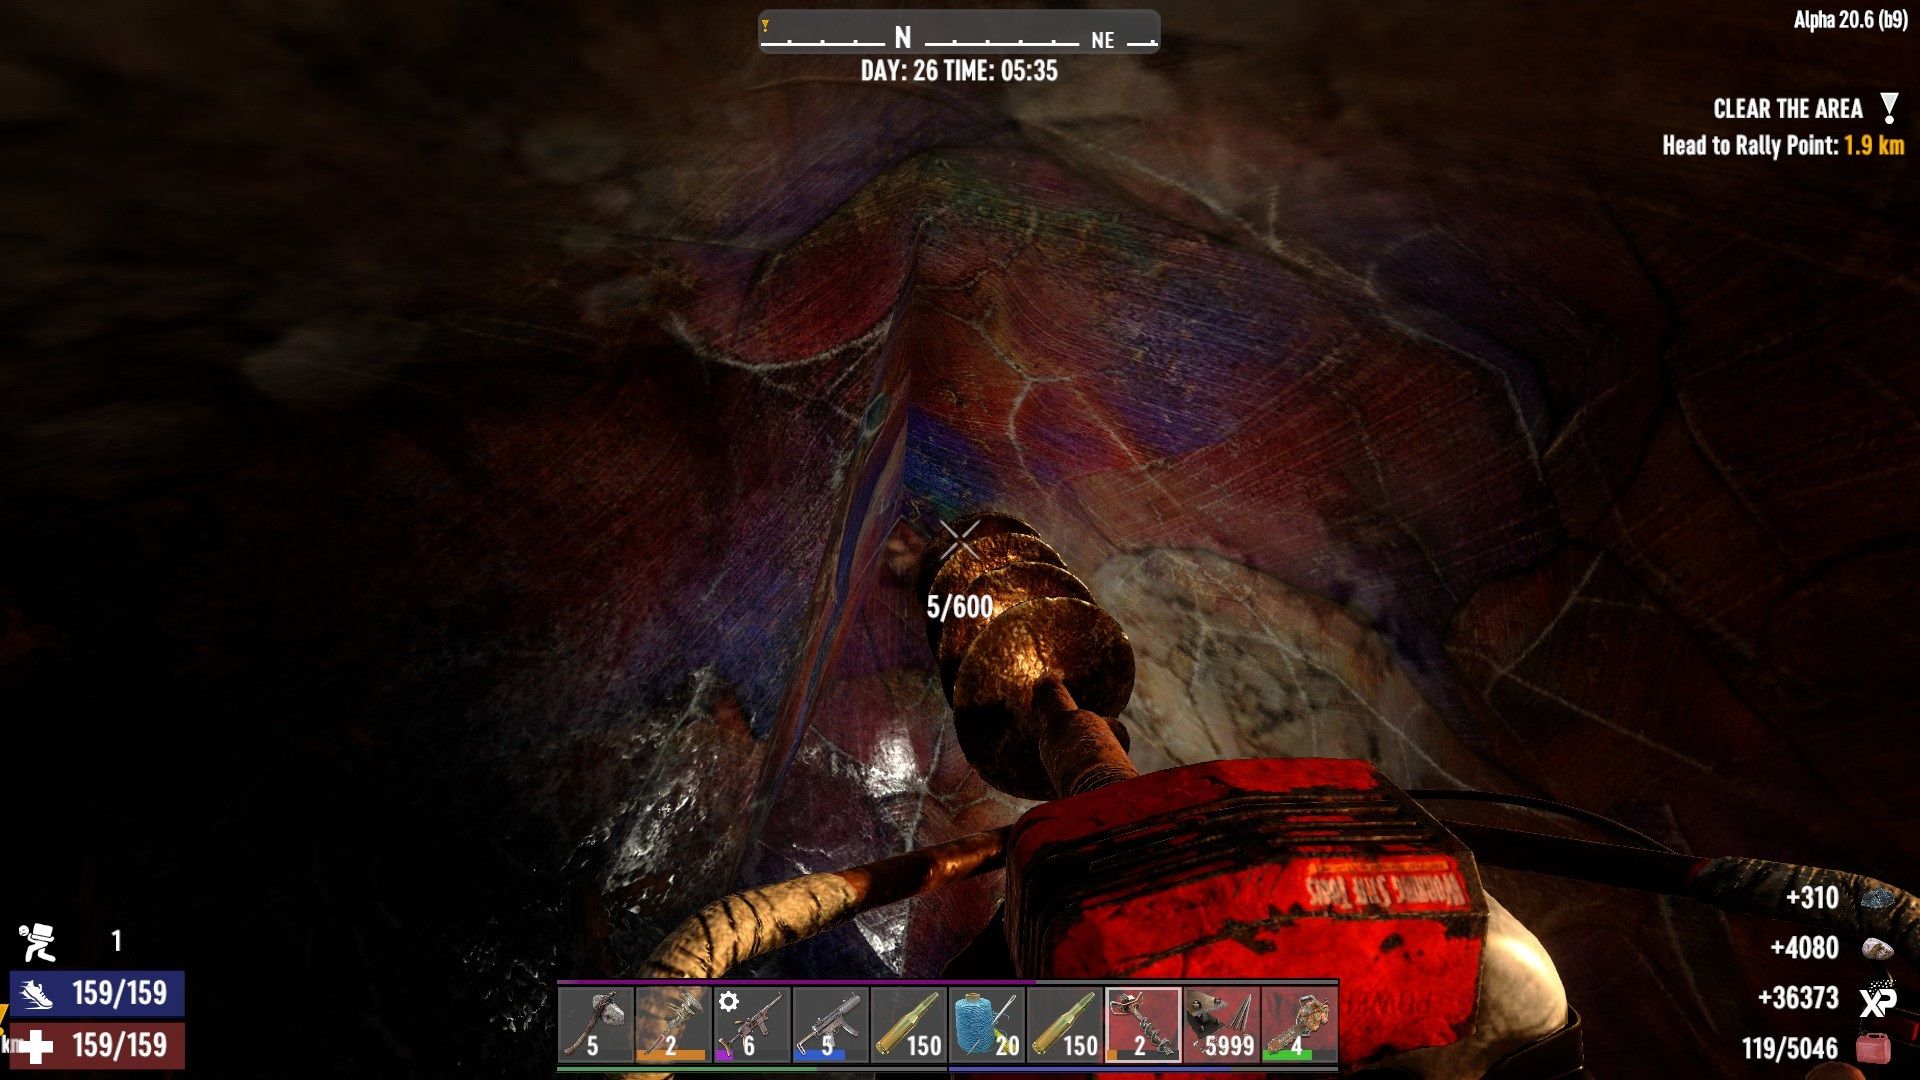 mining with an augor 7 Days To Die.jpg